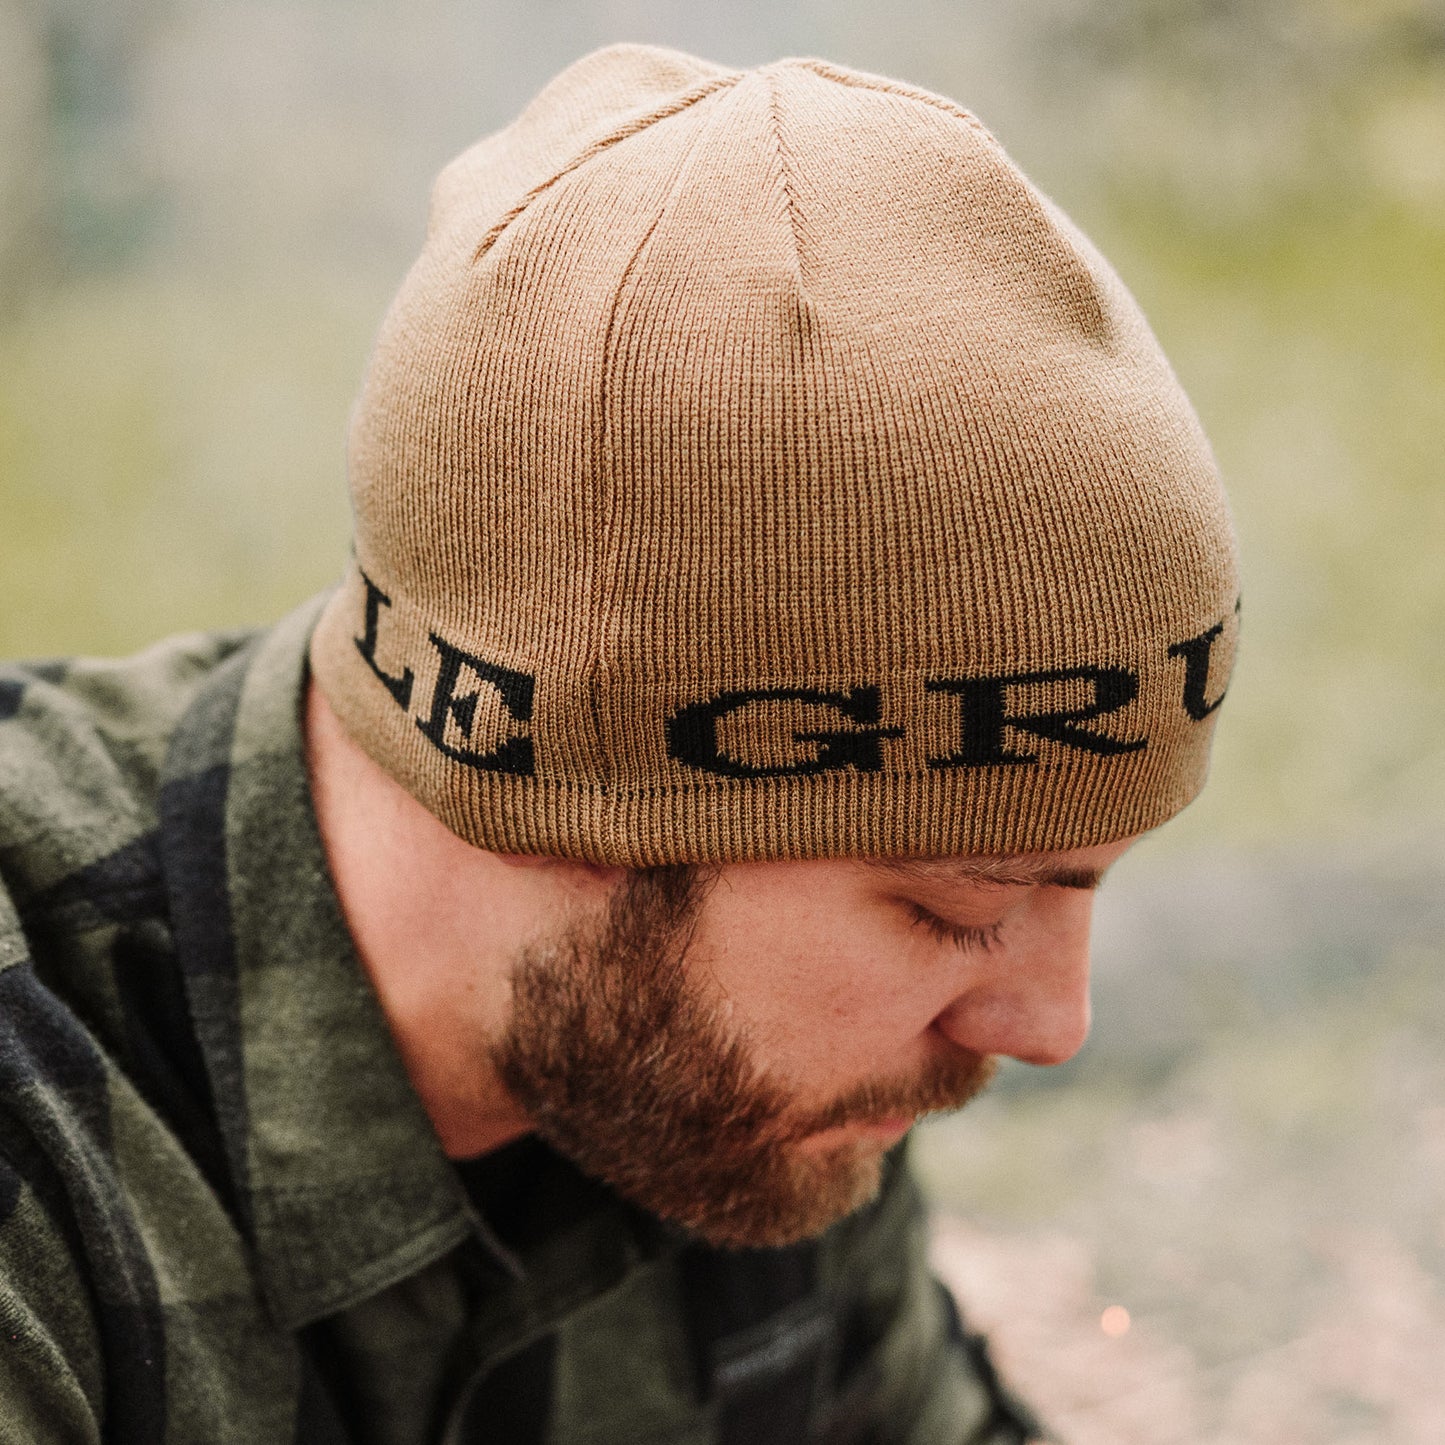 Skull Beanie in Black and Tan | Grunt Style 